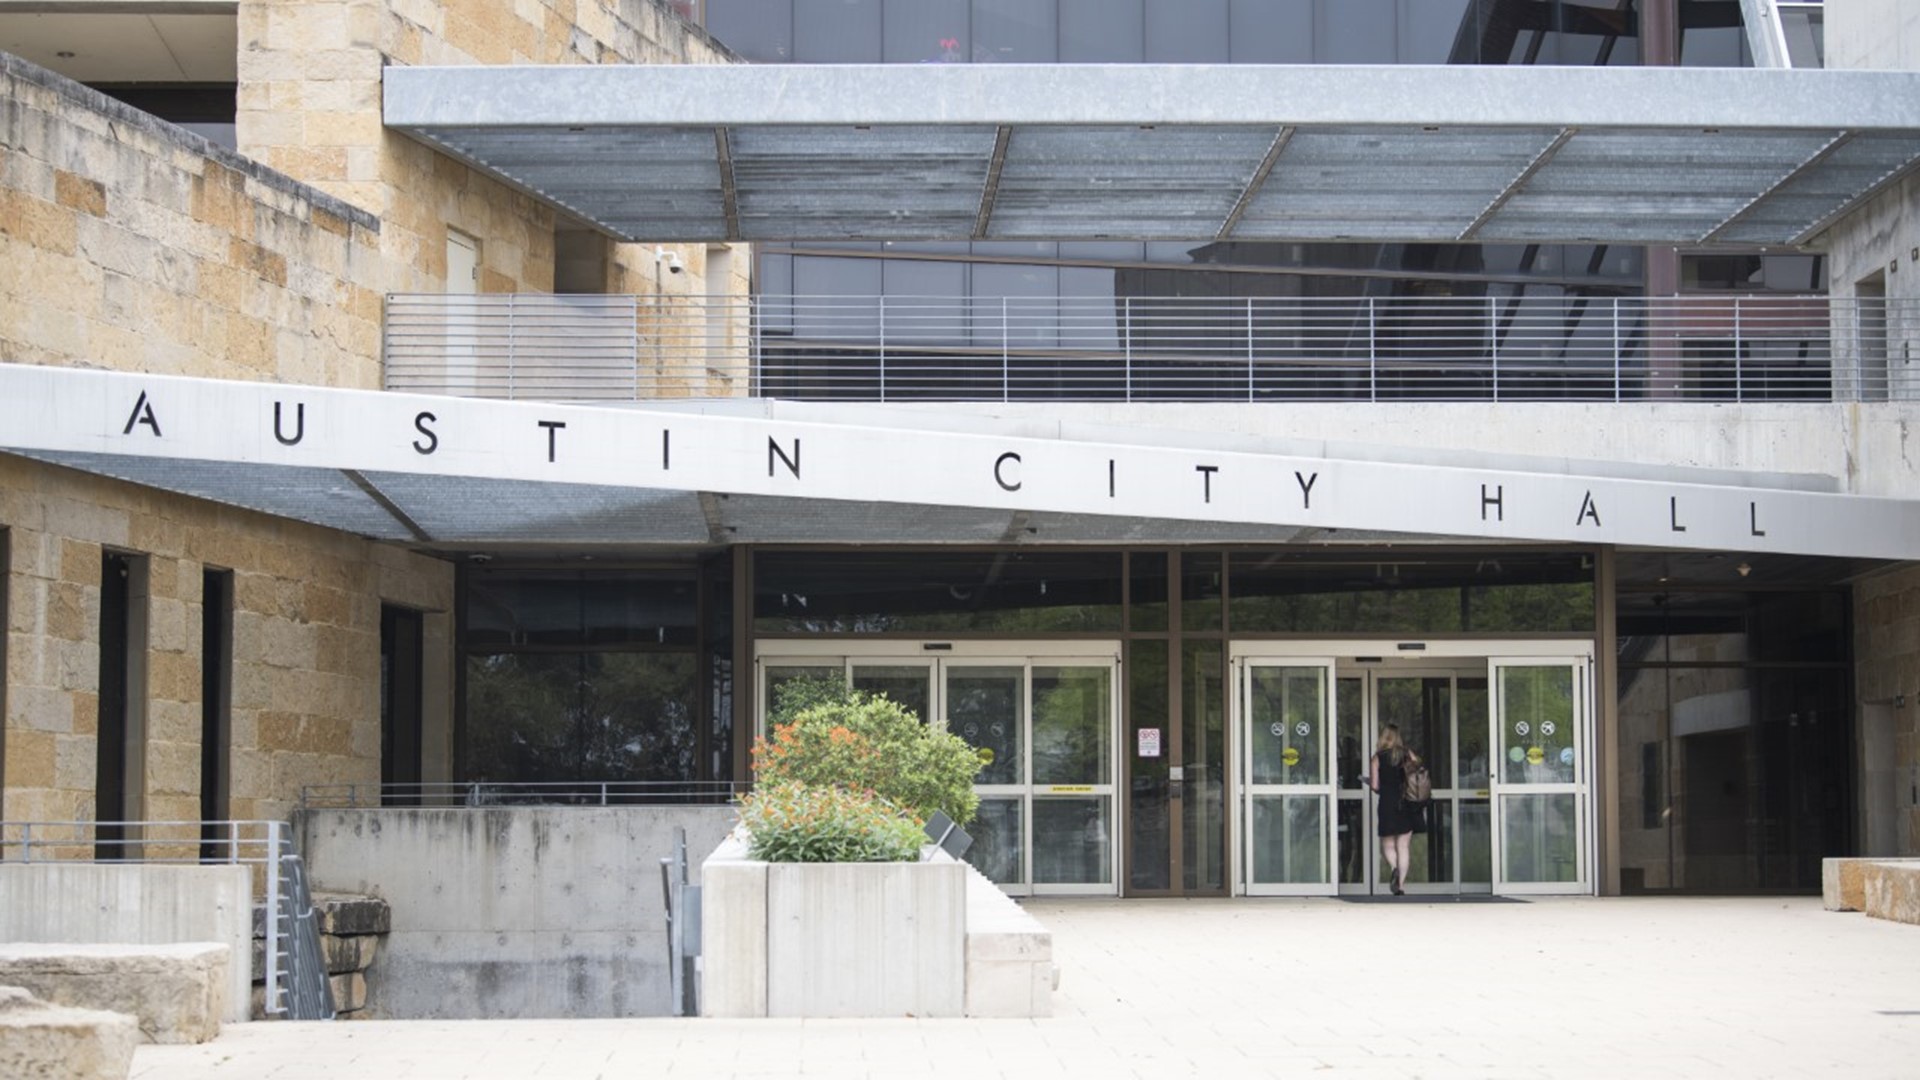 A judge issued a temporary restraining order requiring the Austin City Council to let the public speak for three minutes on each item they sign up to talk about.